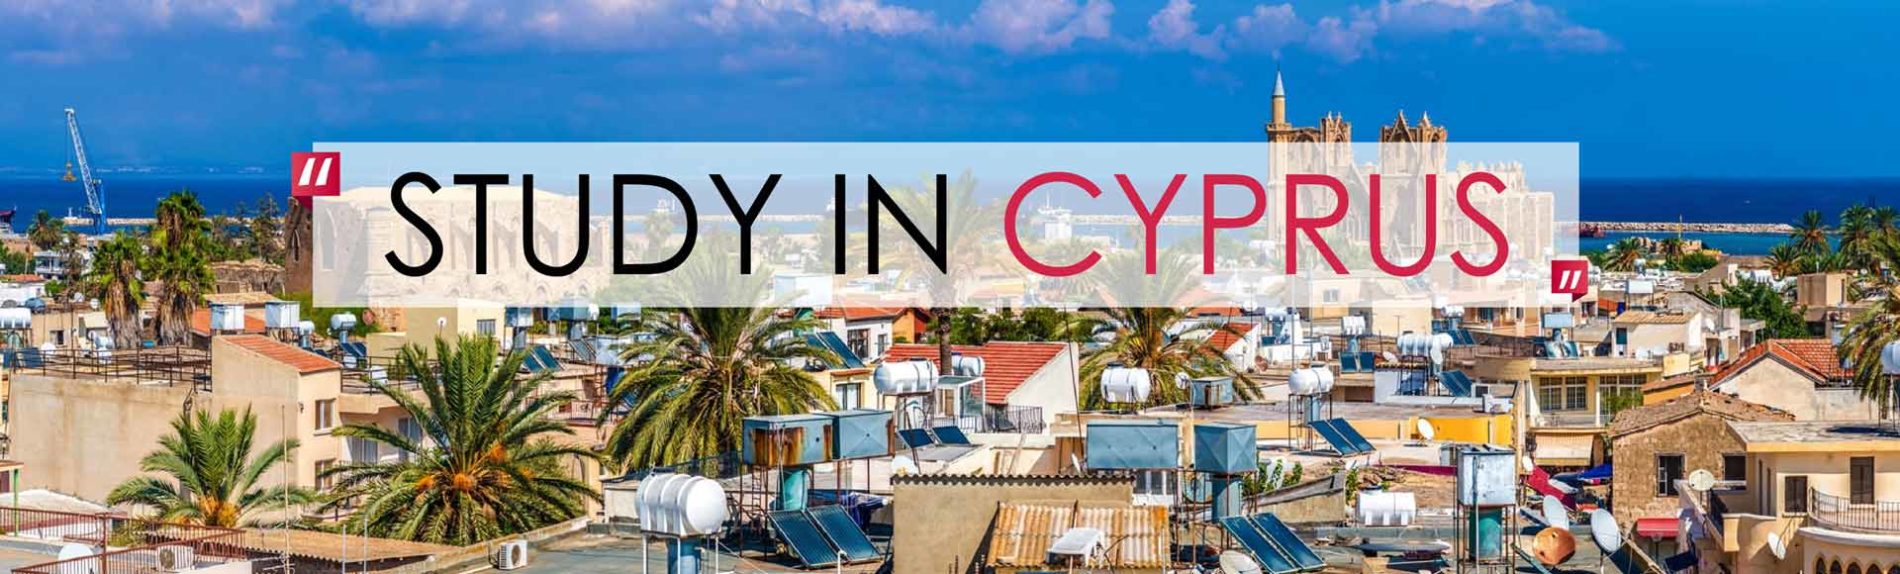 Study in Cyprus for Indian student | Education in Cyprus for Indian students | Cyprus Student Visa | cyprus student visa and work | studying and working in cyprus